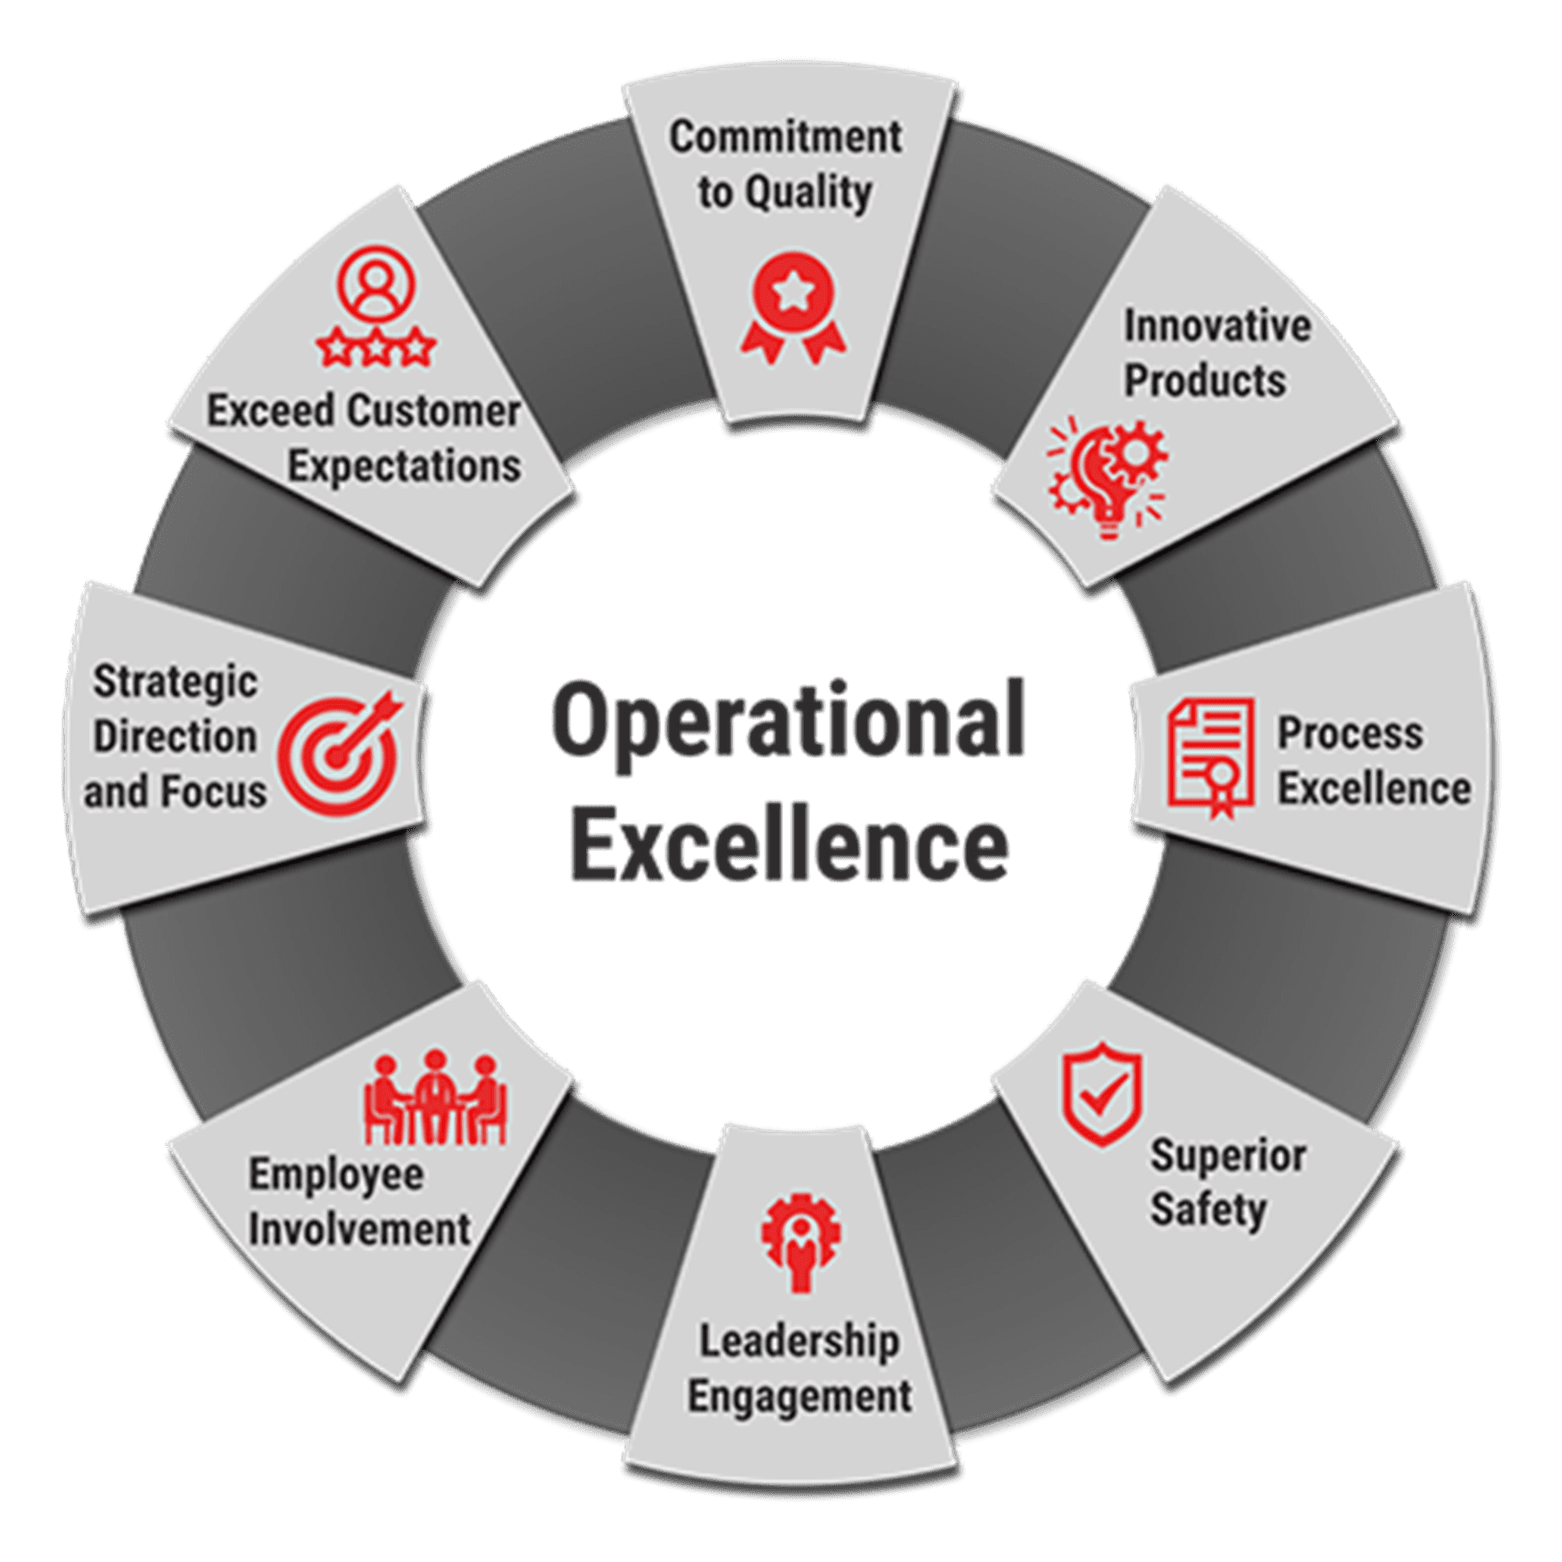 opex meaning in business